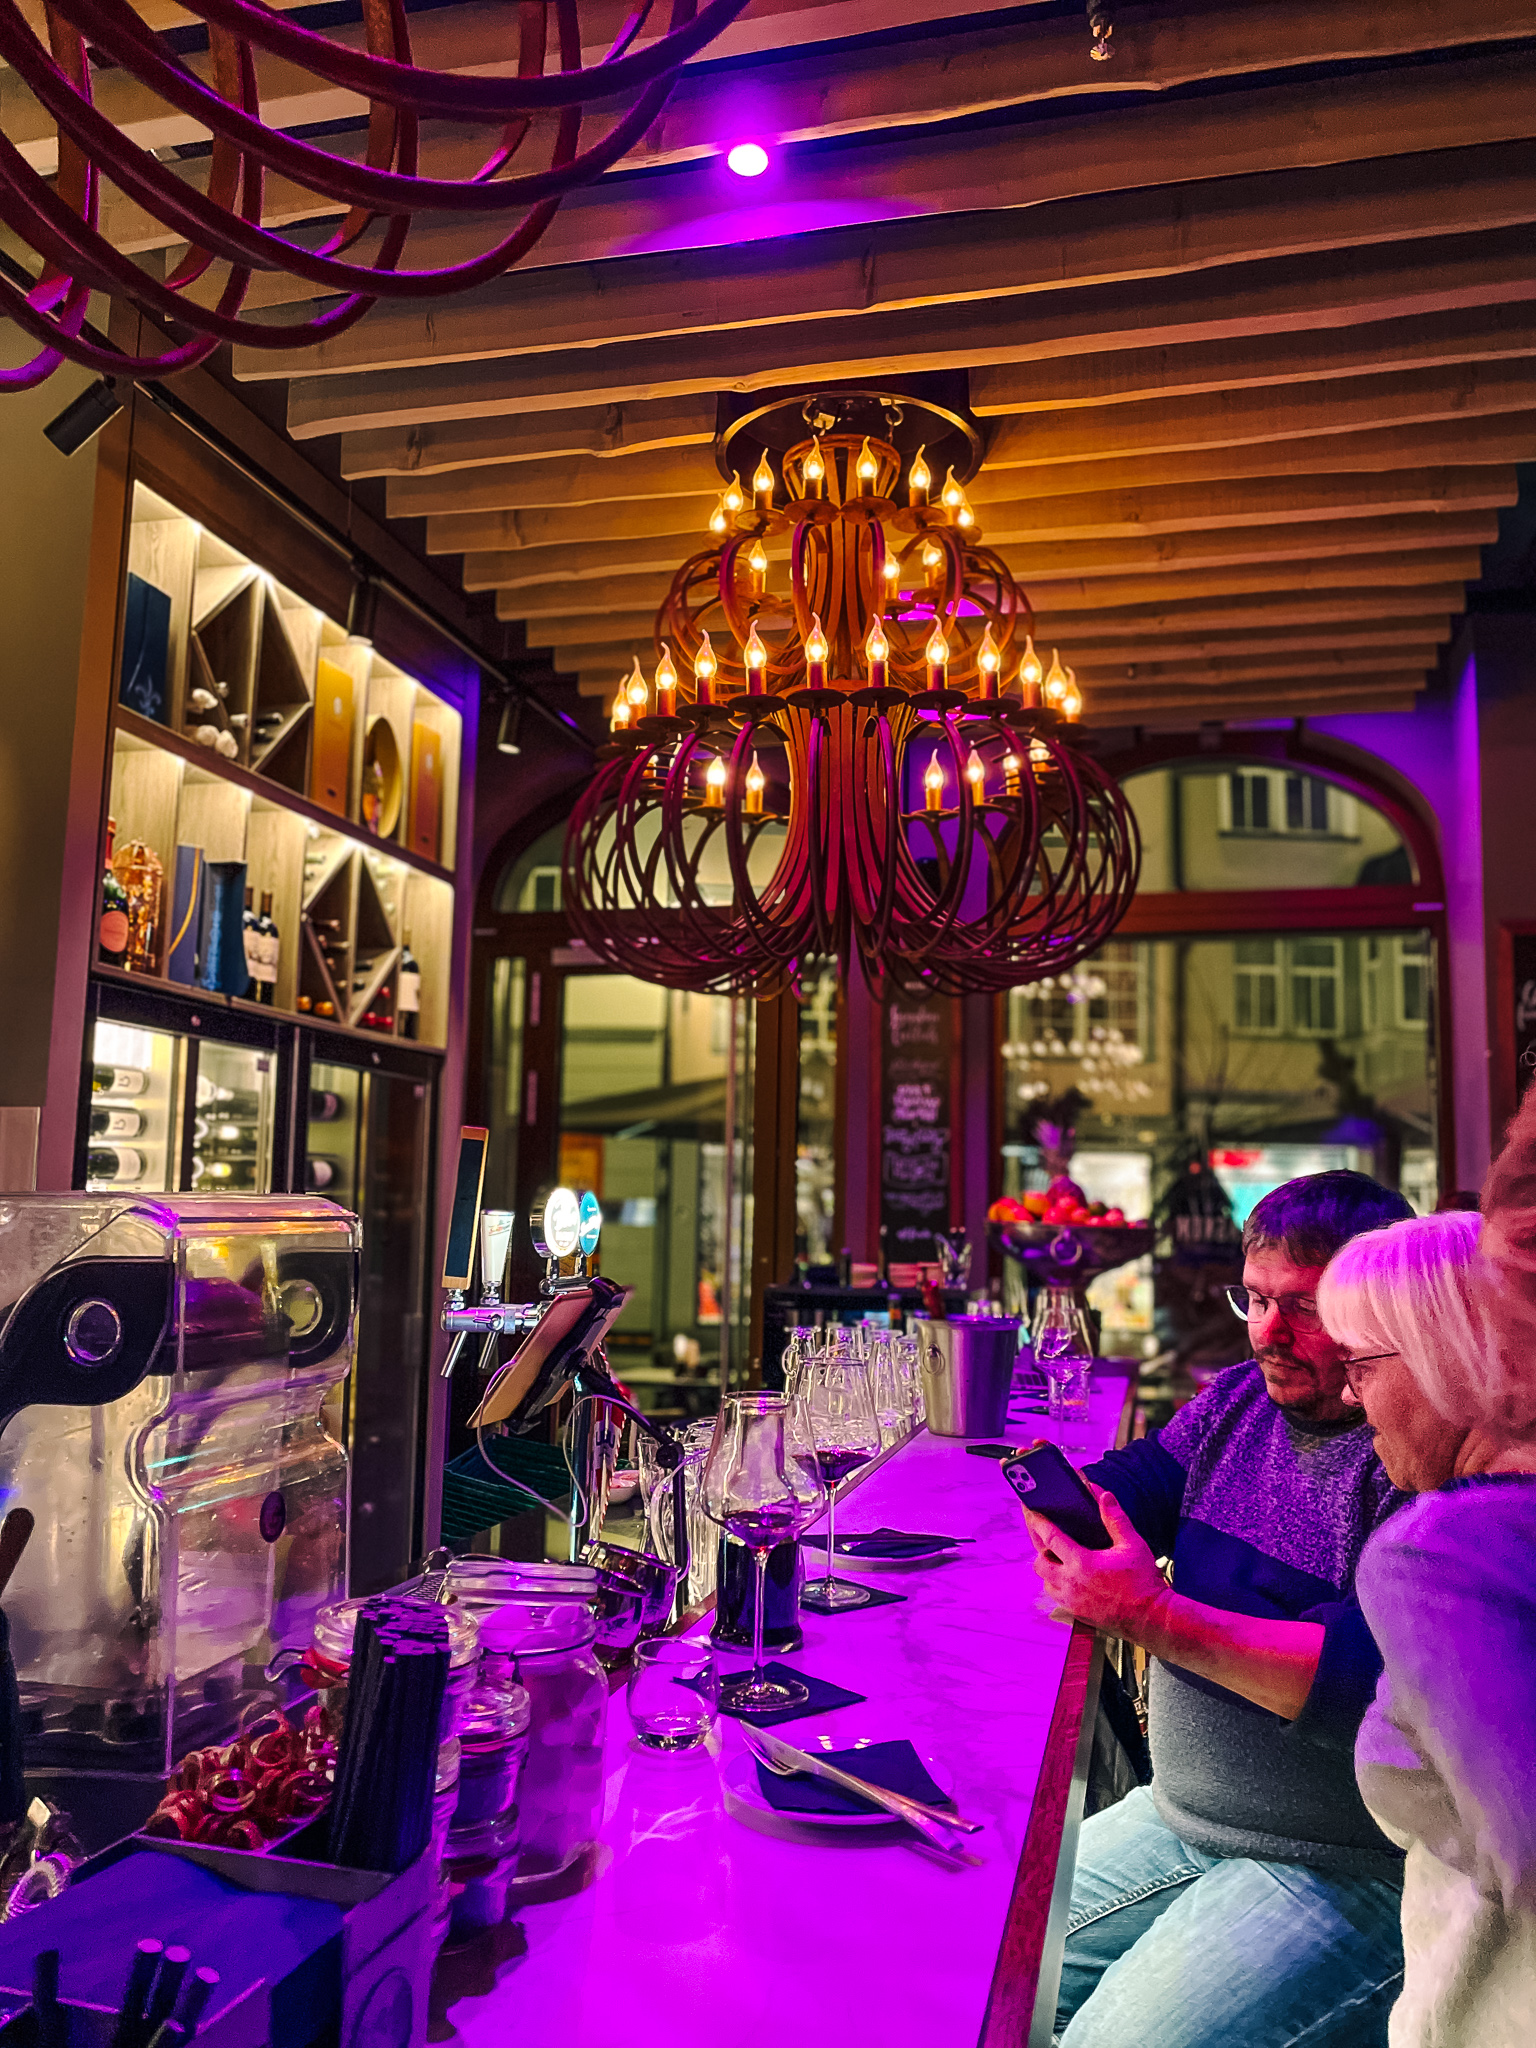 A view of the Magnum Wine Bar's bar seating area at night, featuring an elaborate iron cast chandelier with candles, purple low-lighting and people sitting at the bar. 